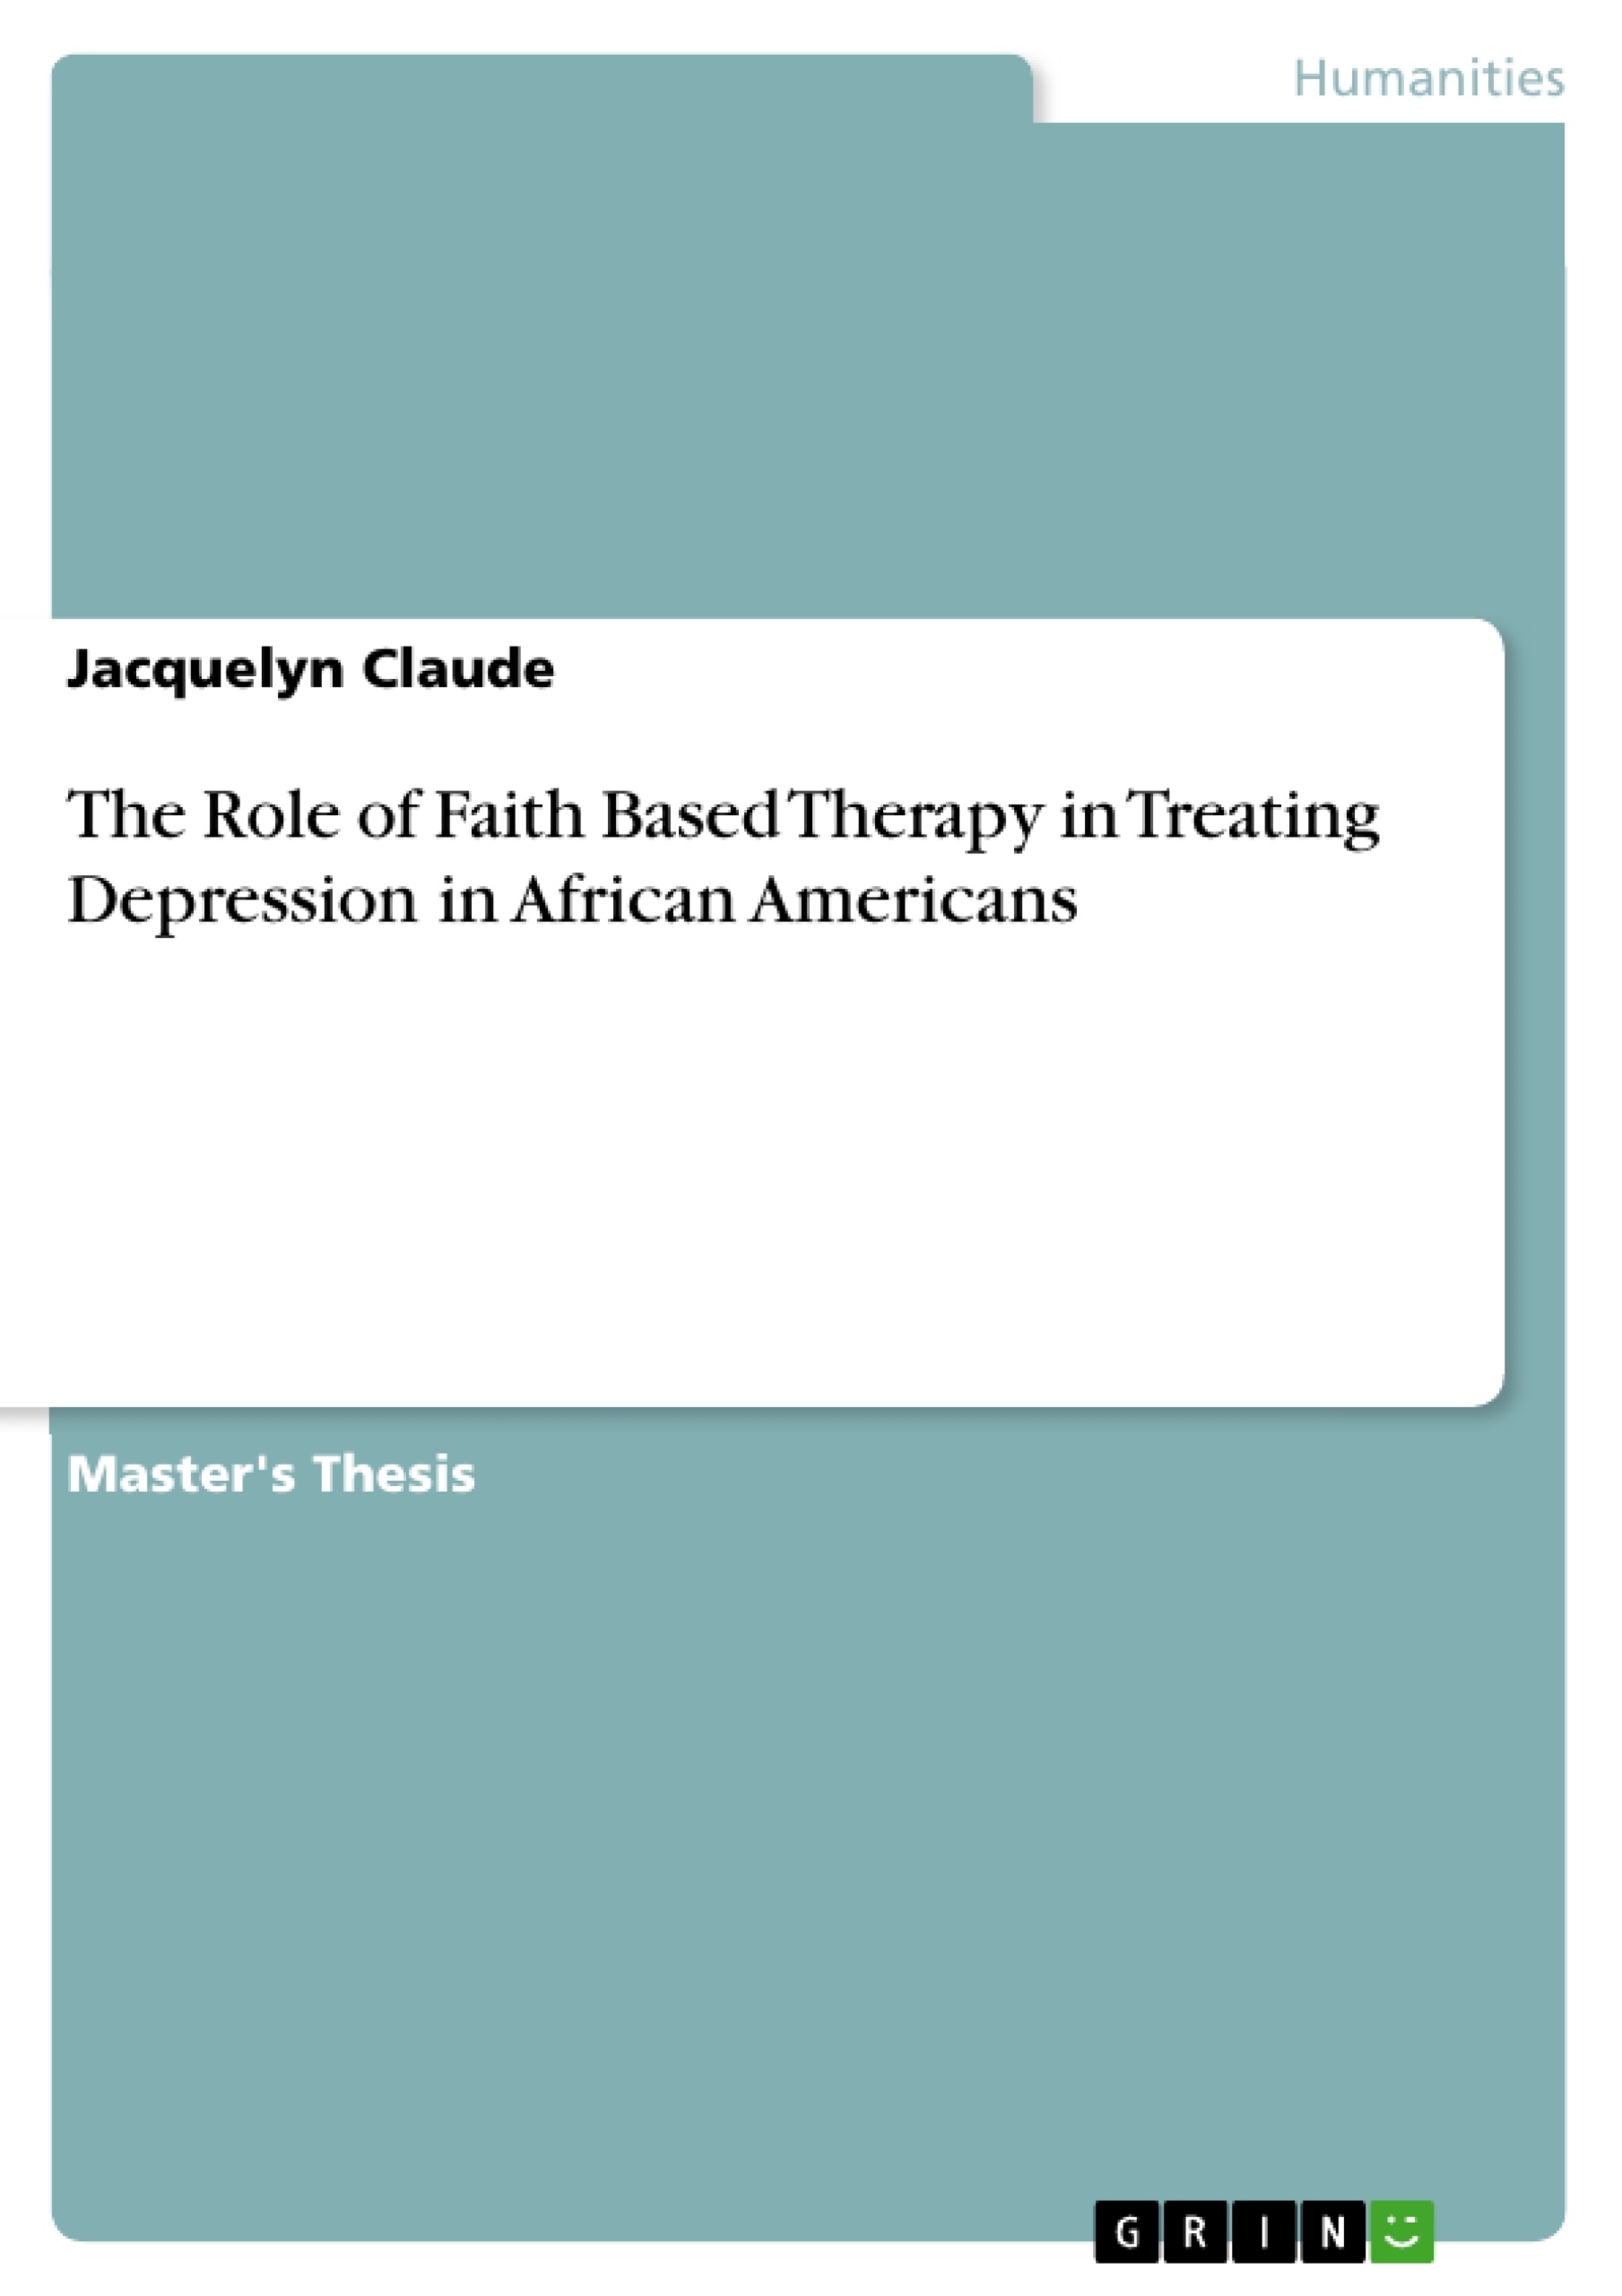 Título: The Role of Faith Based Therapy in Treating Depression in African Americans